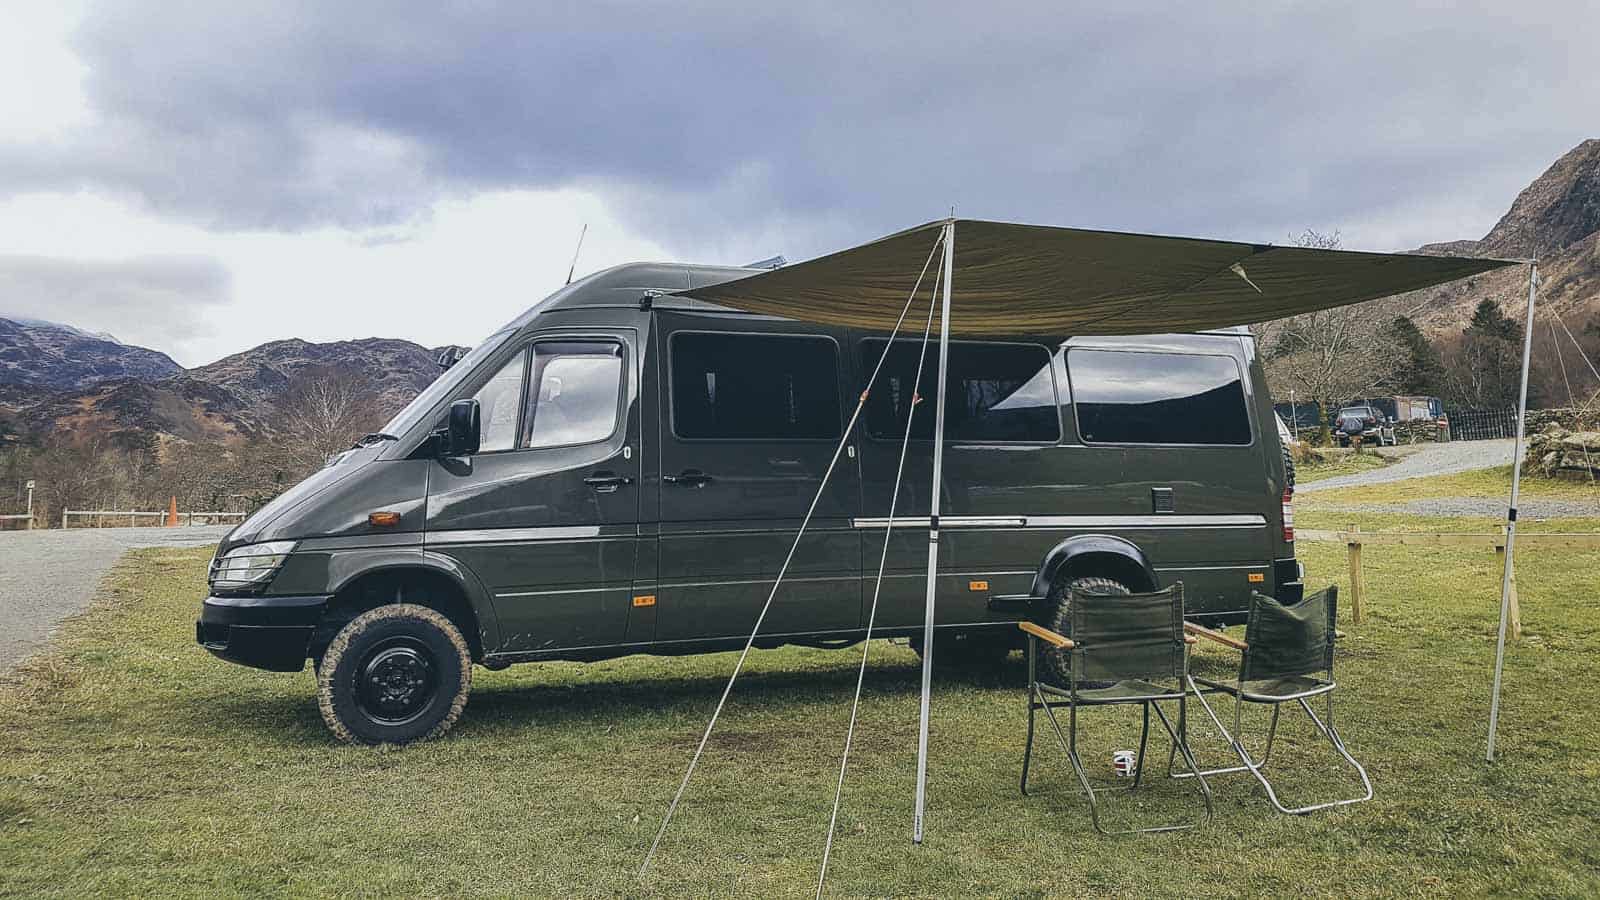 Take a look at our camper van layout design with detailed plans, materials used and some advantages and disadvantages of our design to help inform you on your final camper van layout design.